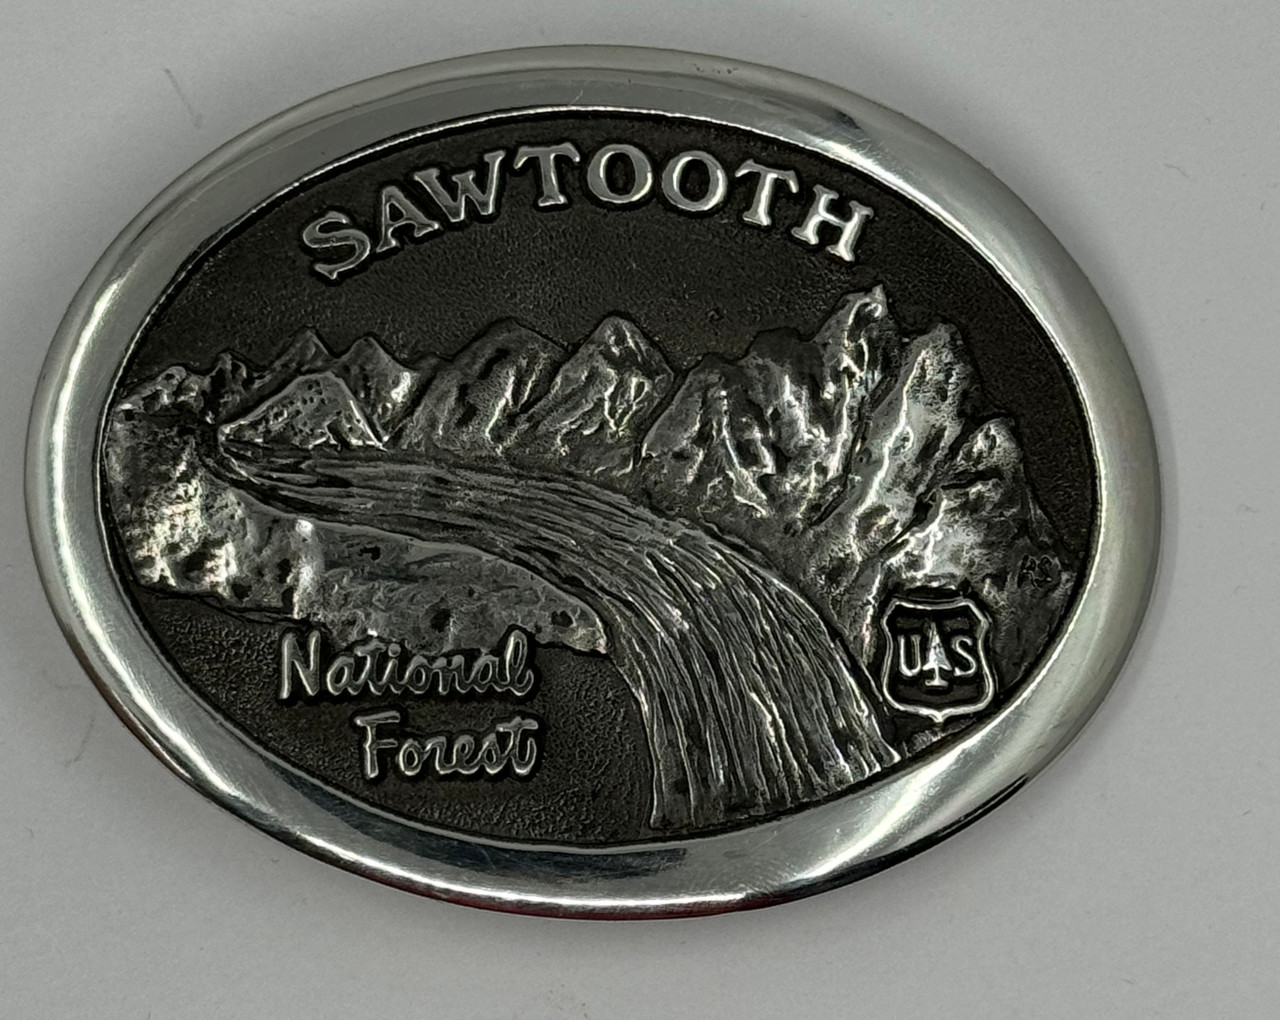 Sawtooth National Forest Buckle (Old)